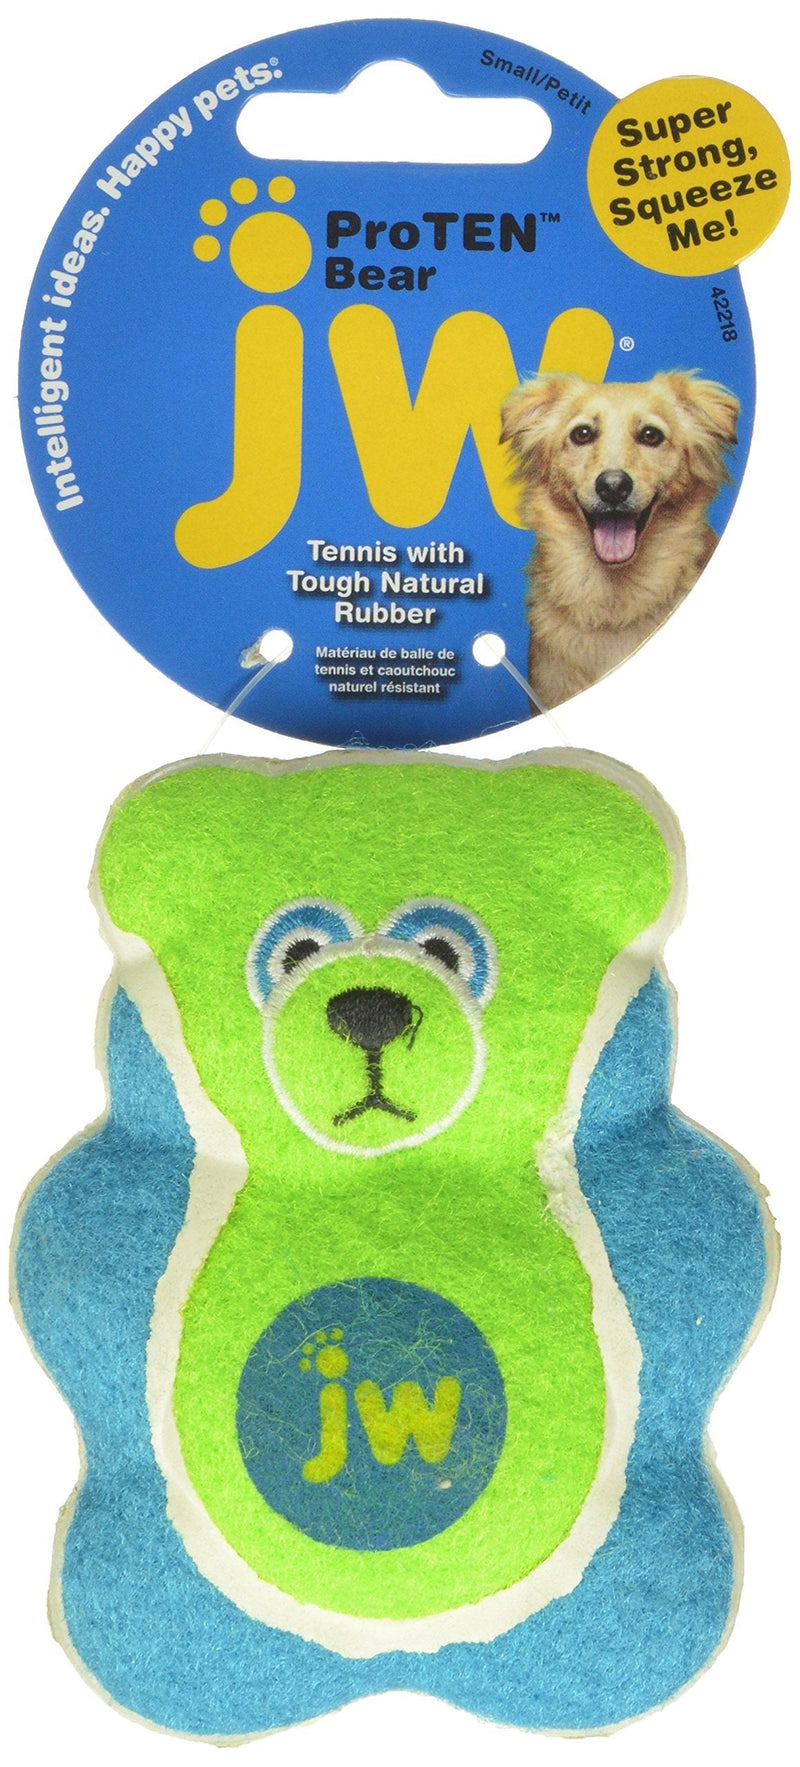 [Australia] - JW Pet Company 42218 Proten Bear Toy for Pets, Small, Assorted Colors (Green/Pink or Green/Blue) 